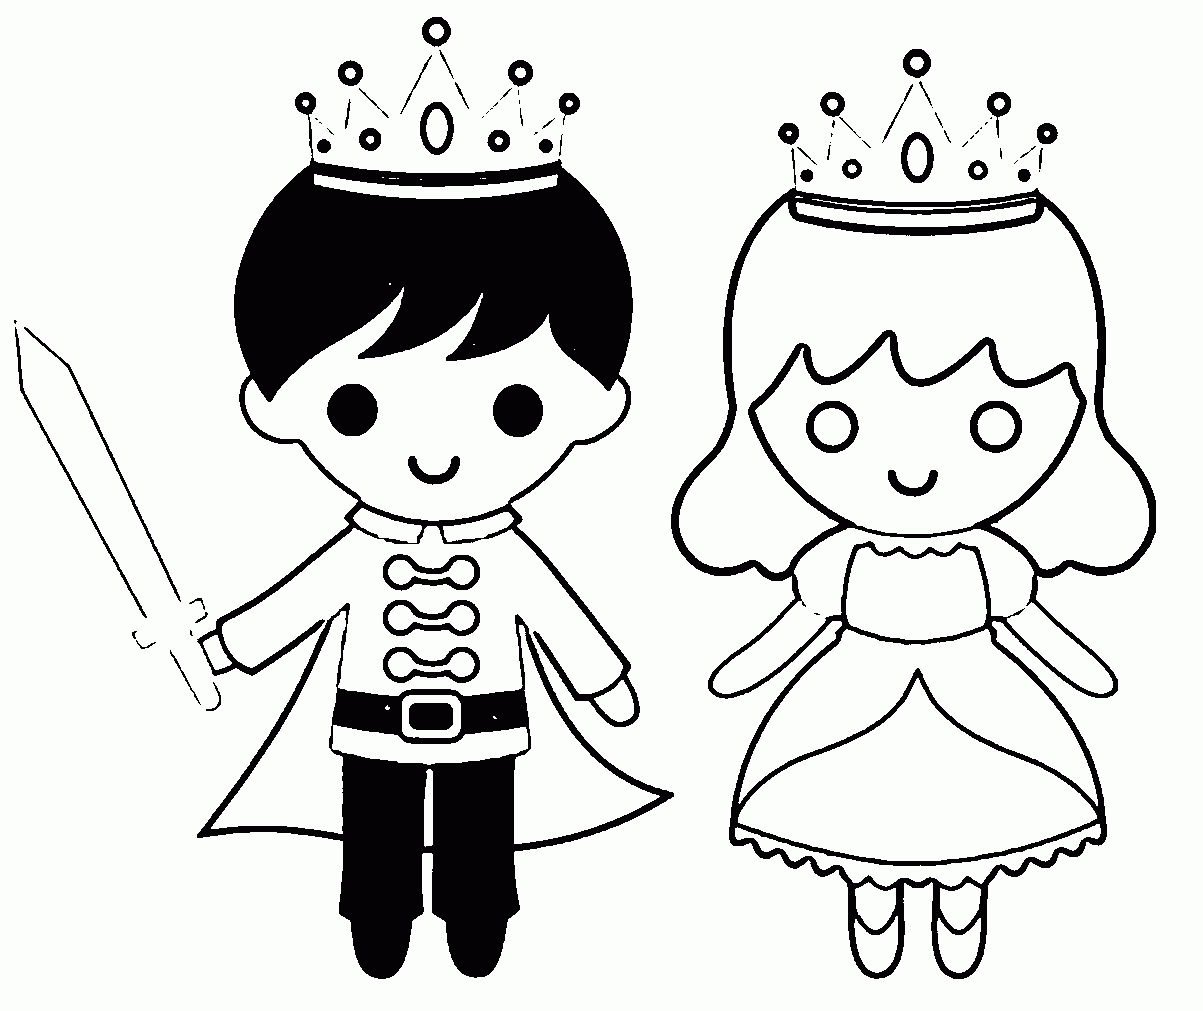 coloring-pages-princes-at-getdrawings-free-download